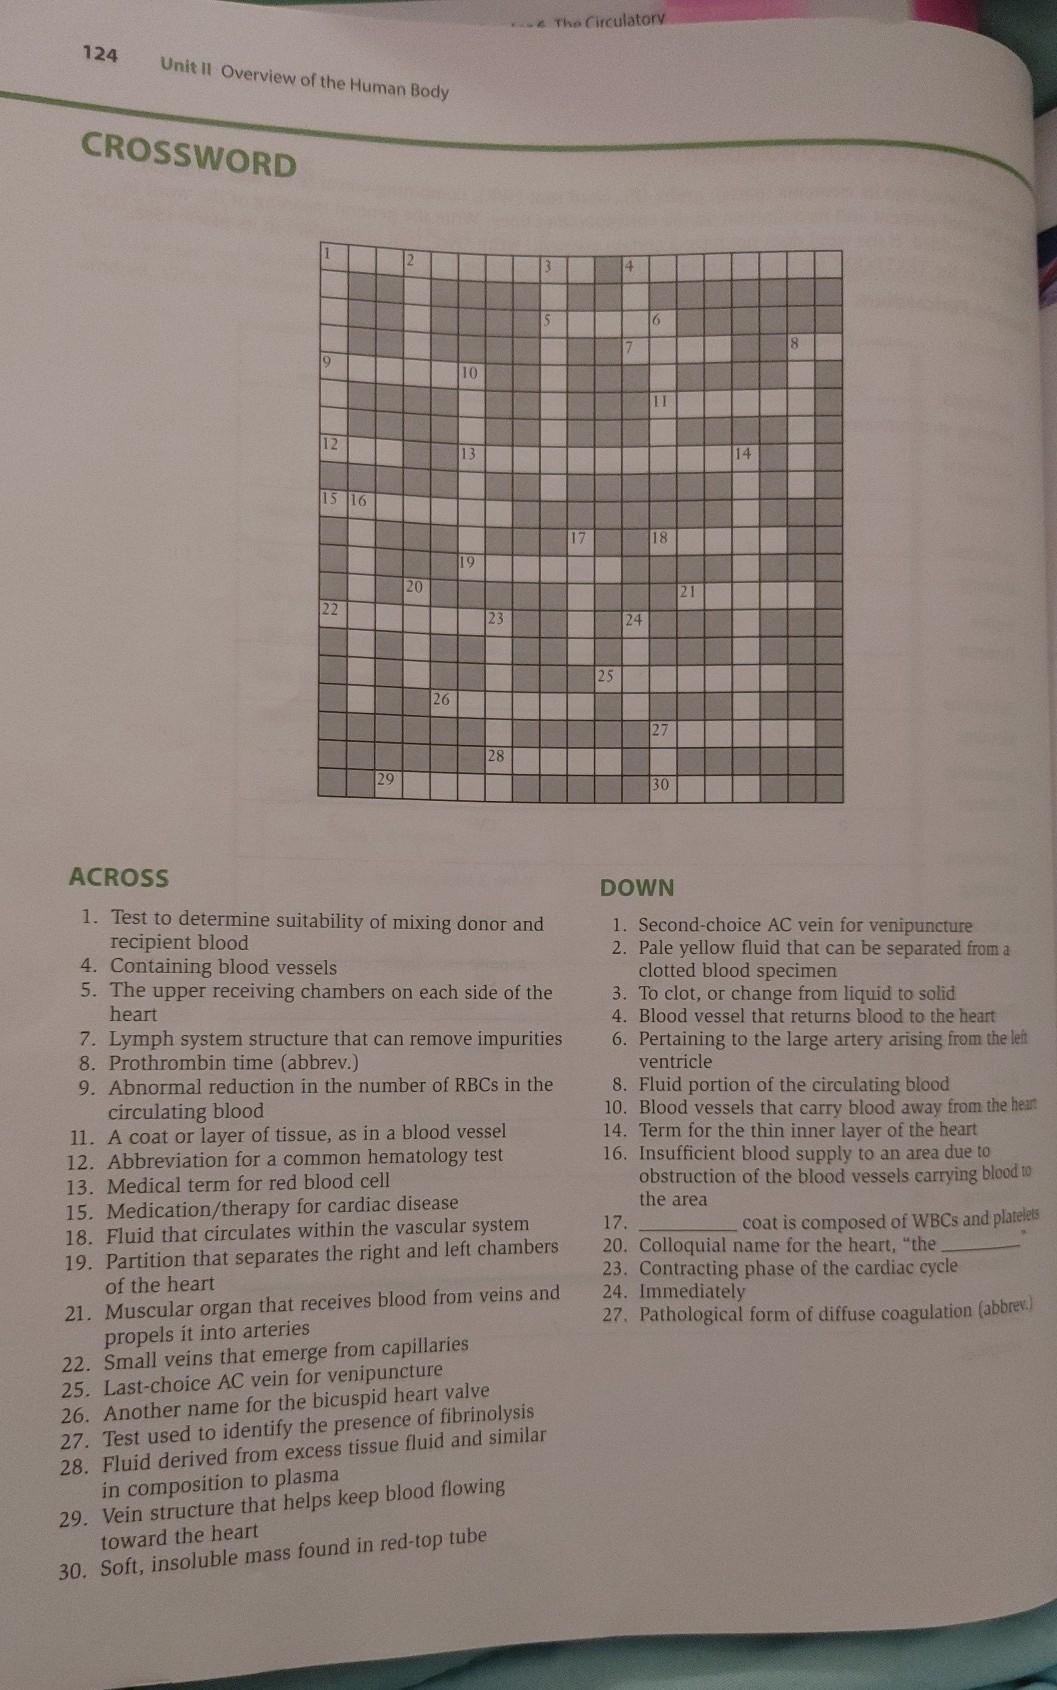 The Circulatory 124 Unit II Overview of the Human Body CROSSWORD 4 S 16 10 11 12 14 15 16 17 18 19 20 21 22 23 24 25 26 27 28